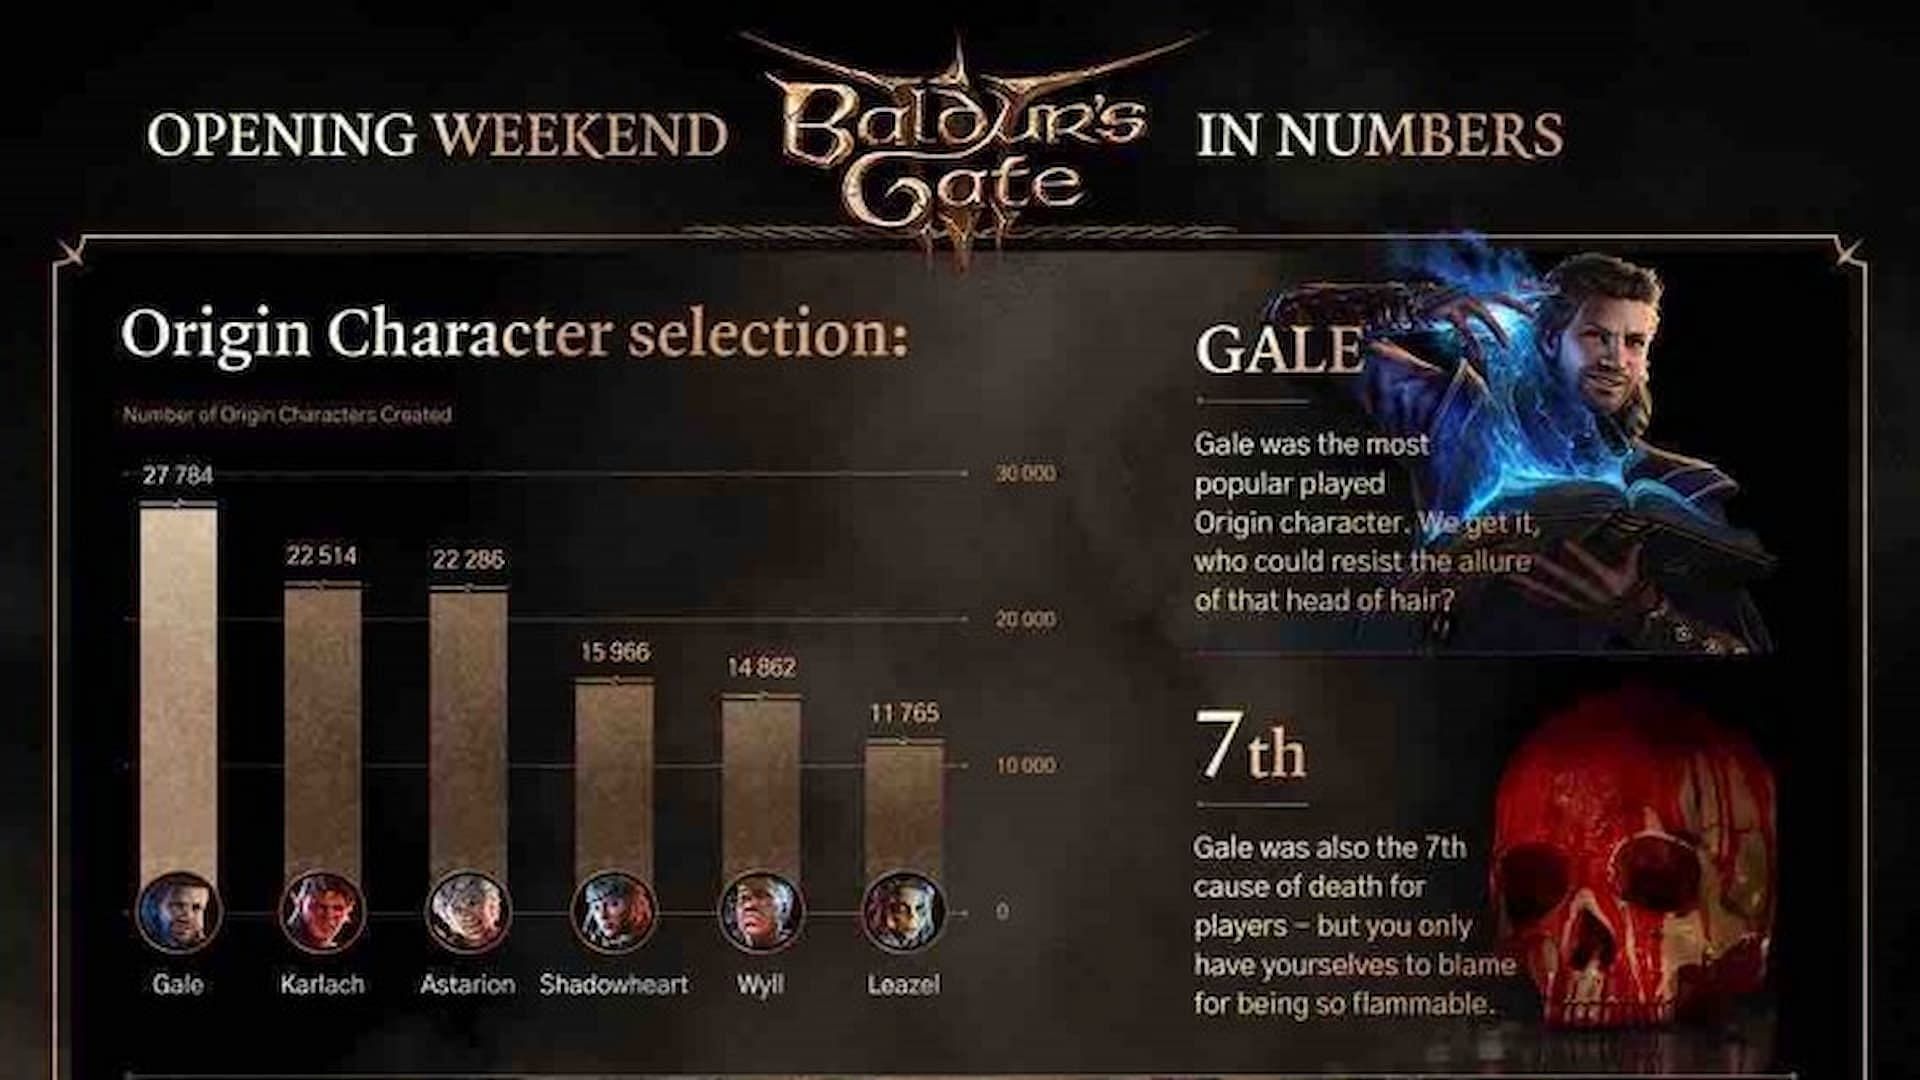 The official Baldur's Gate 3 statistics from Larian have been